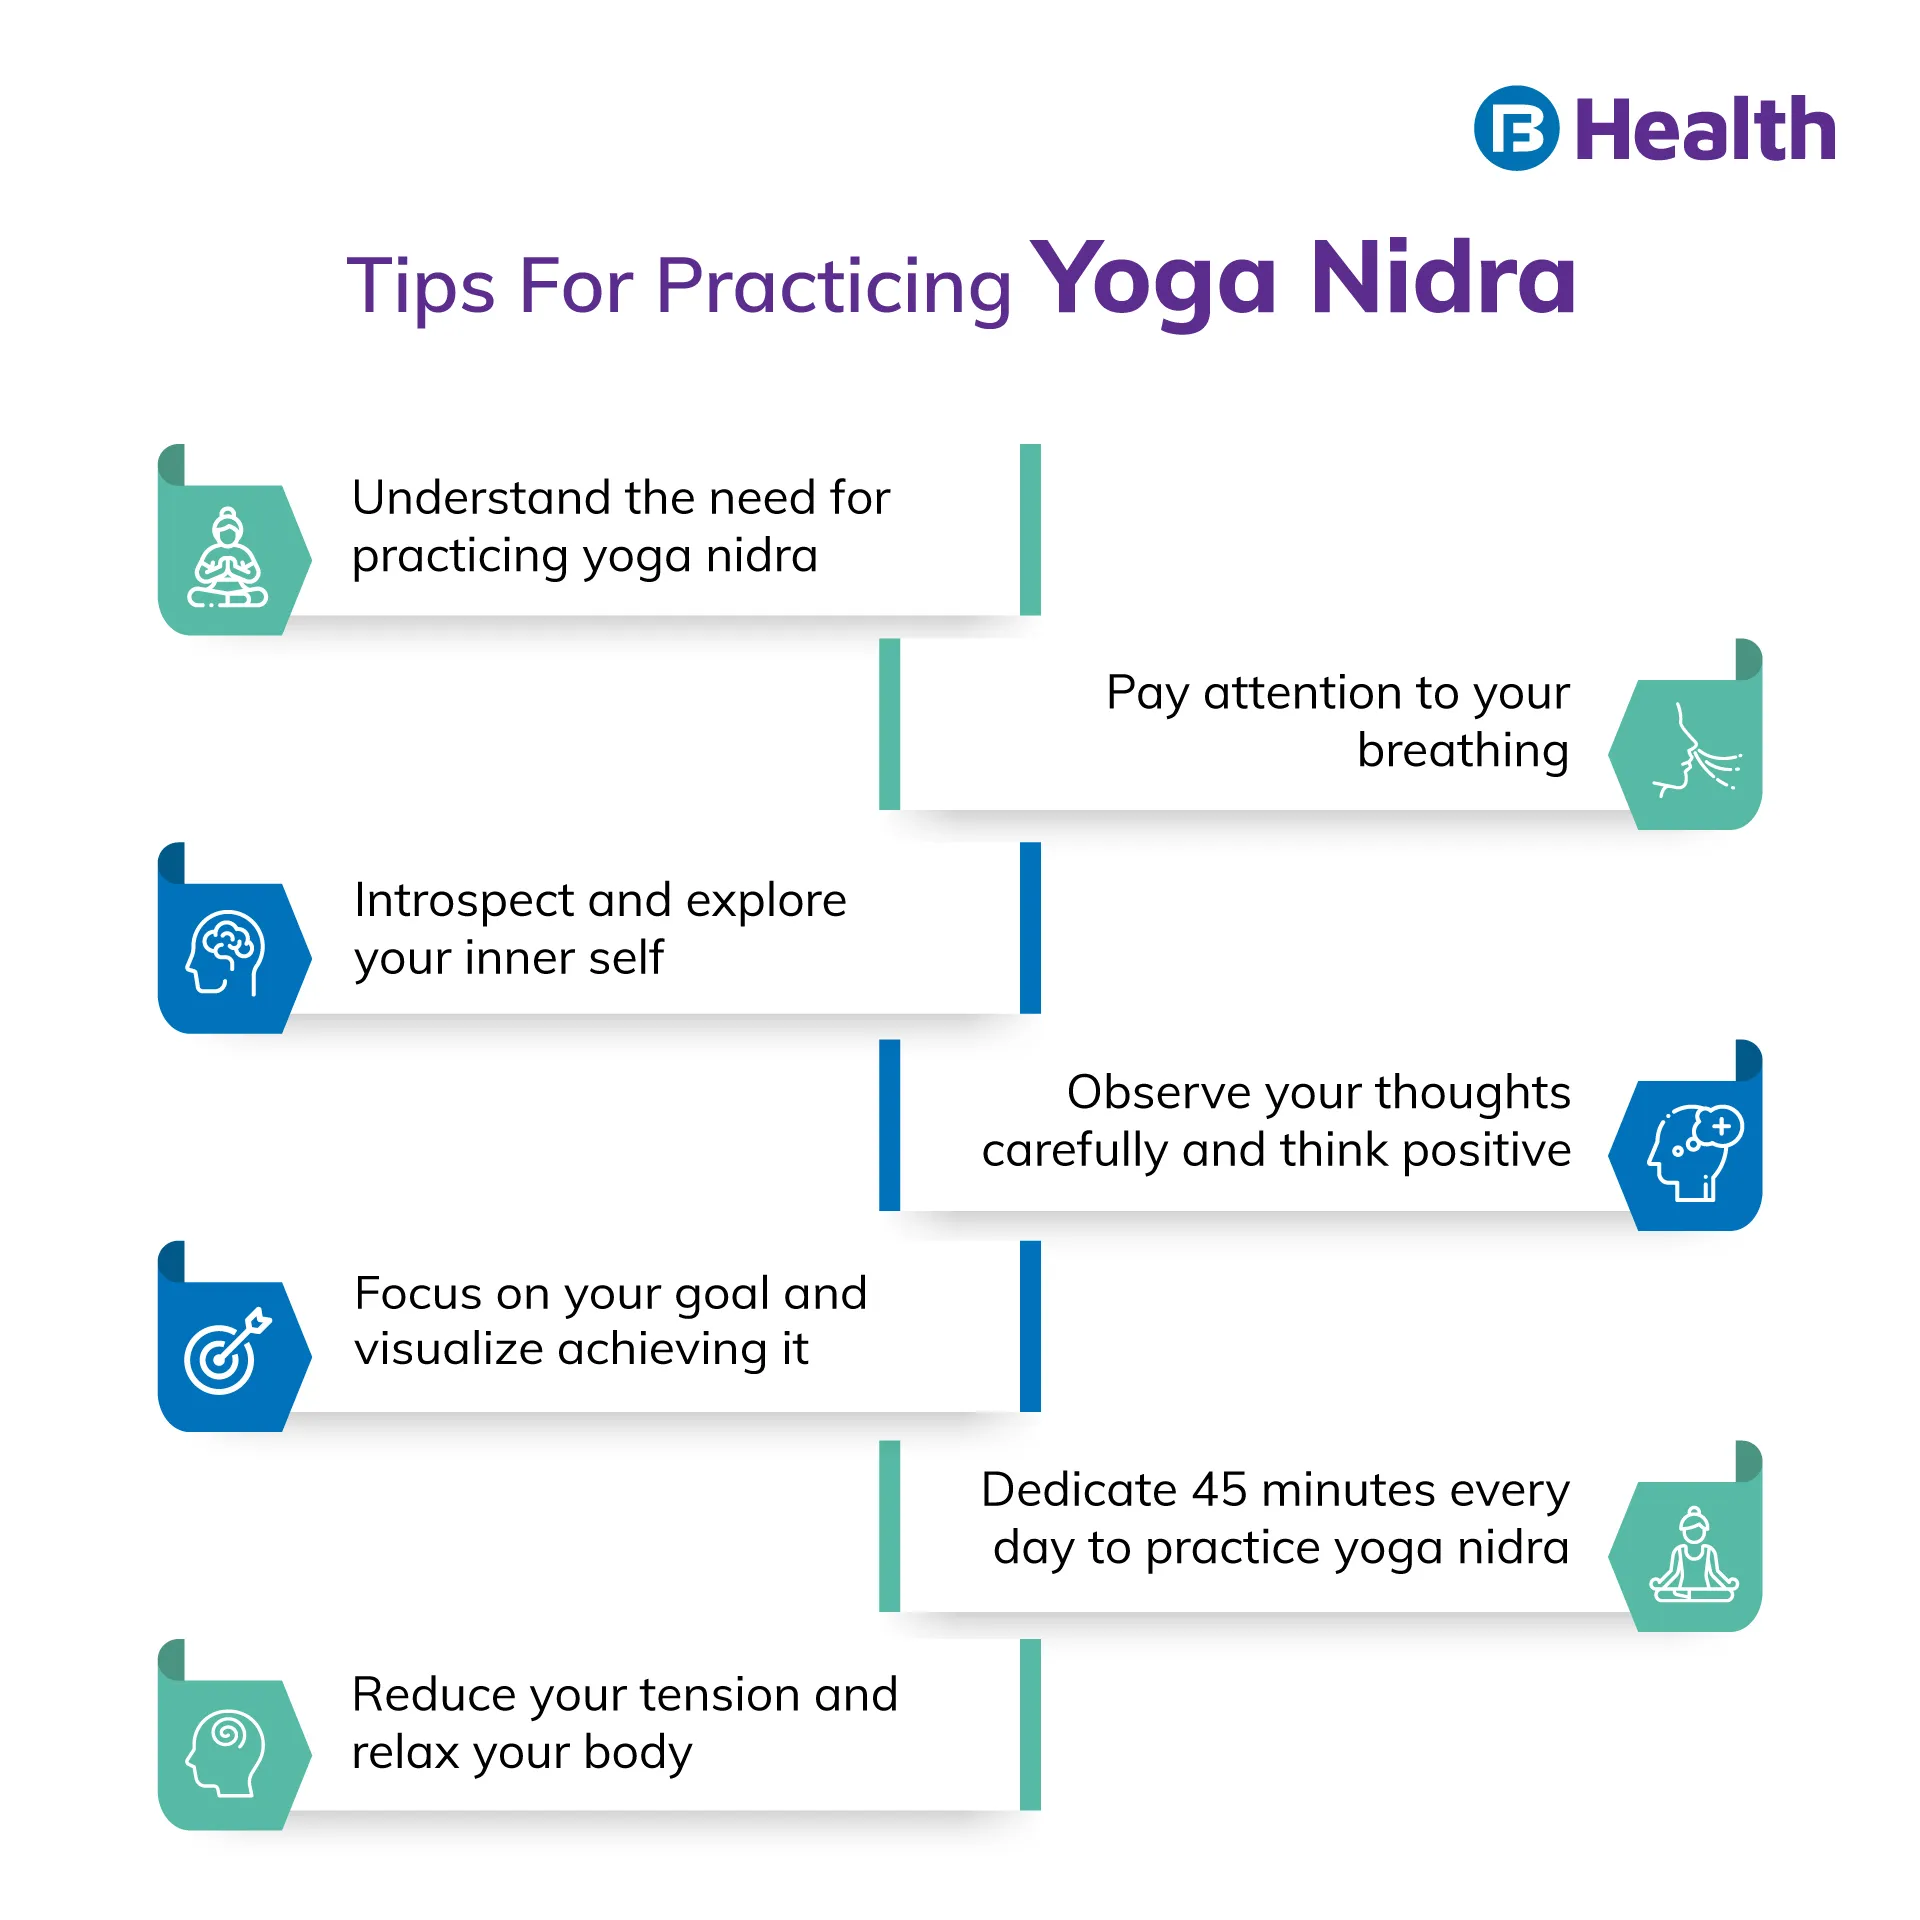 Tips for Yoga Nidra and it's benefits